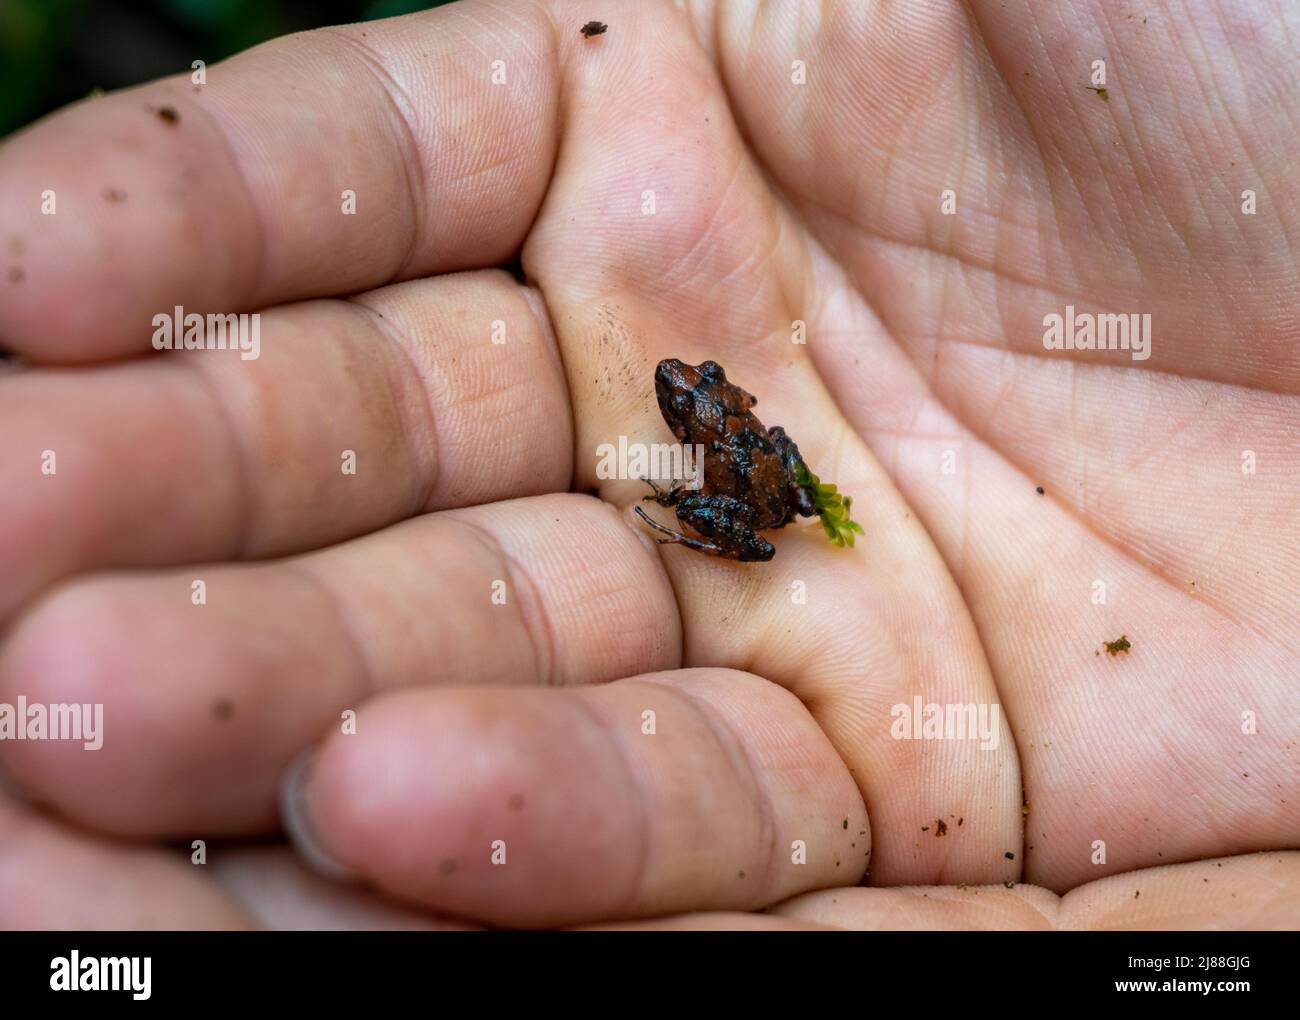 A tiny red tree frog in a hand. Colombia, South America. Stock Photo